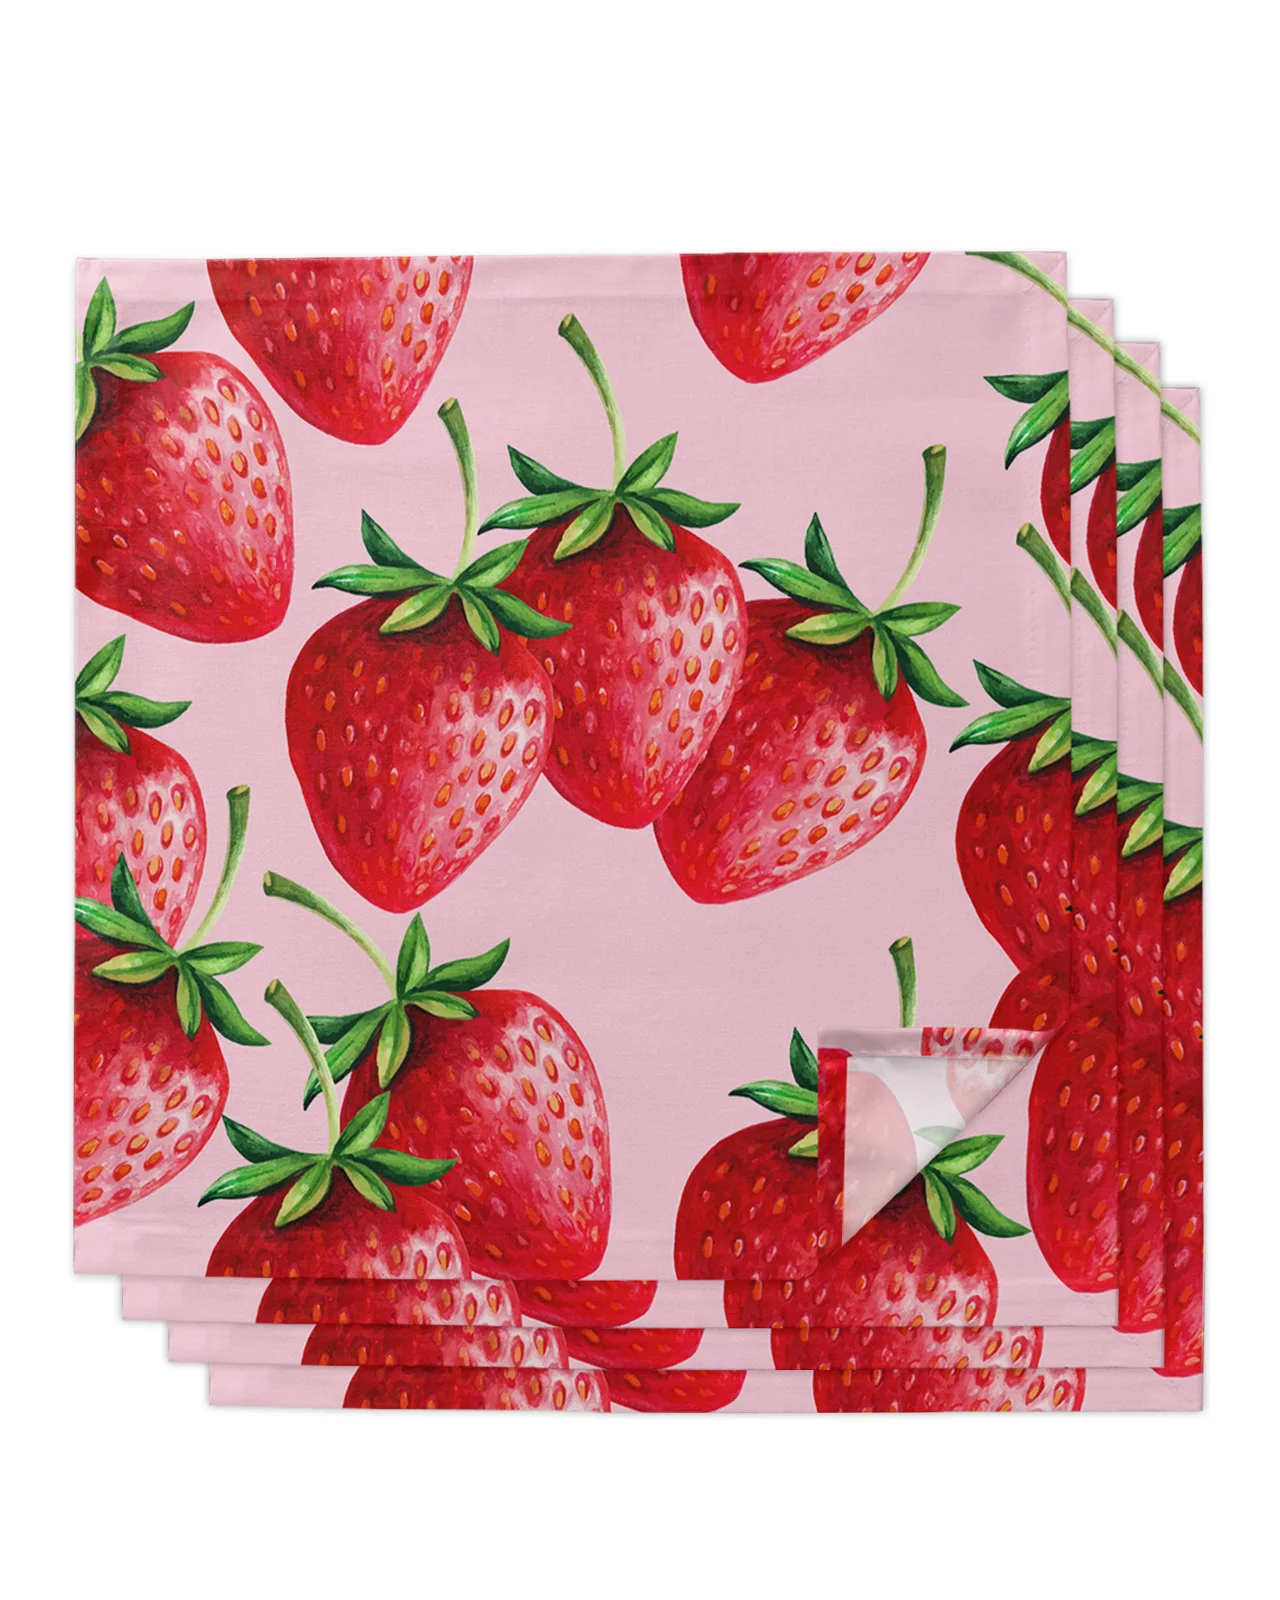 

4pcs Strawberry Fruit Red Fresh Square 50cm Table Napkin Party Wedding Decoration Table Cloth Kitchen Dinner Serving Napkins